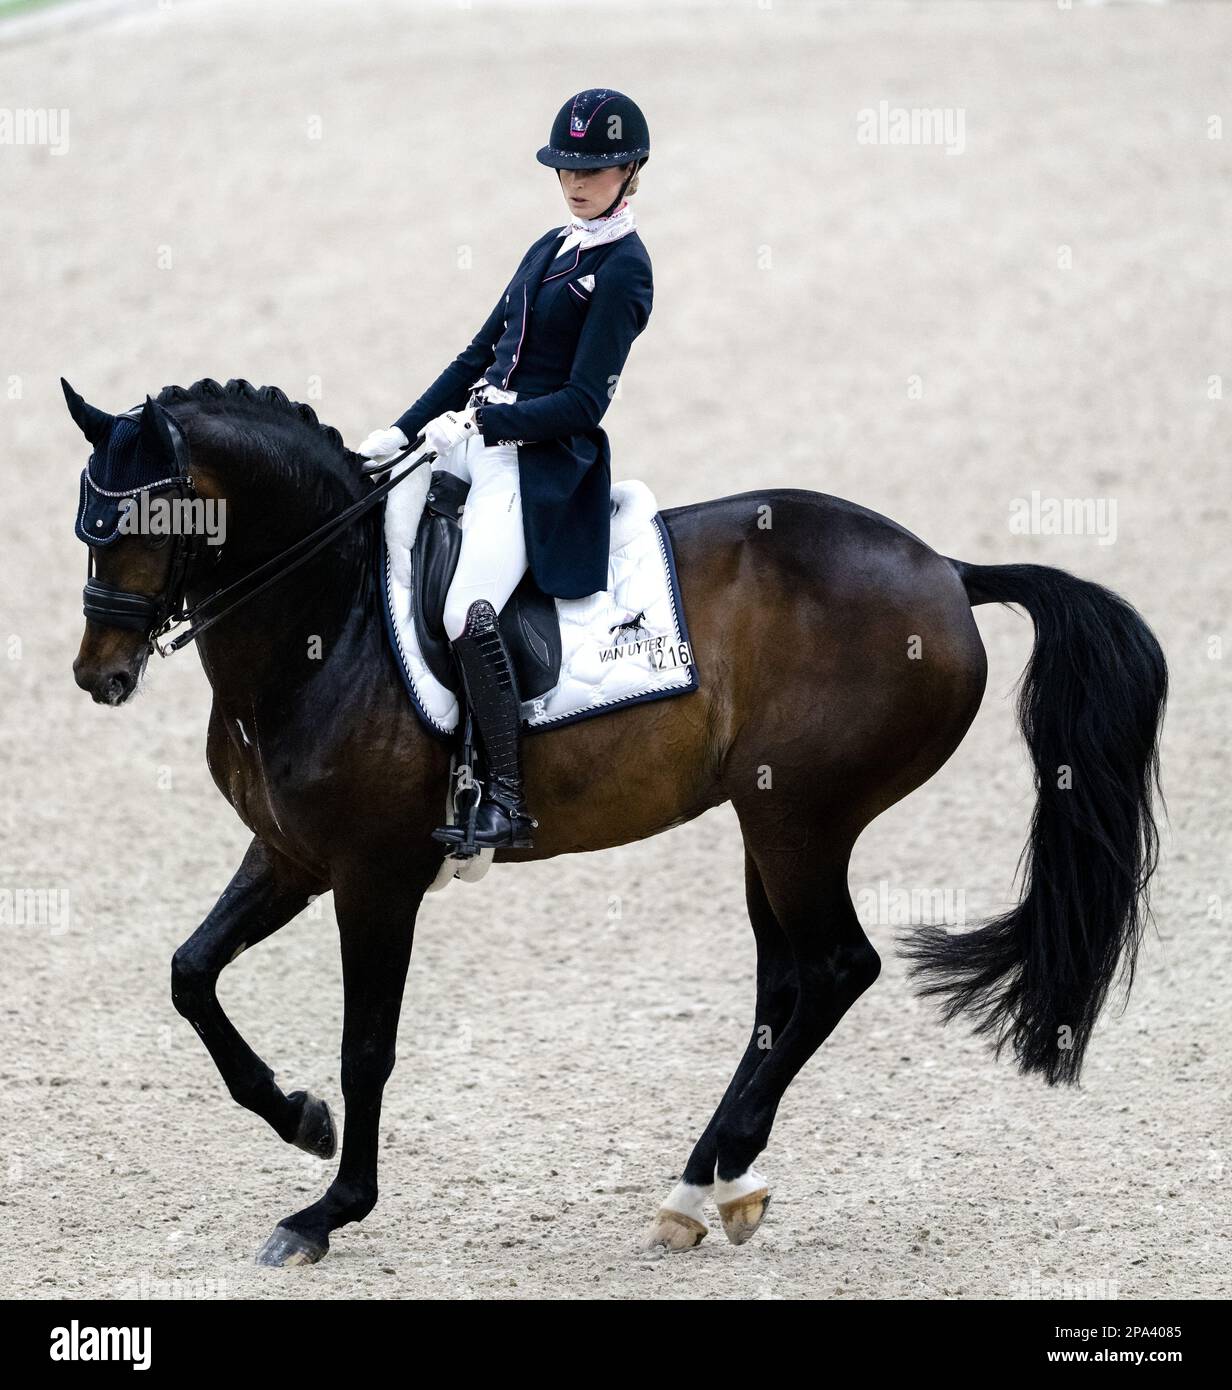 DEN BOSCH - Dinja van Liere (NED) on Hermes NOP in action on the dressage kur to music during The Dutch Masters Indoor Brabant Horse Show. AP SANDER KING Stock Photo